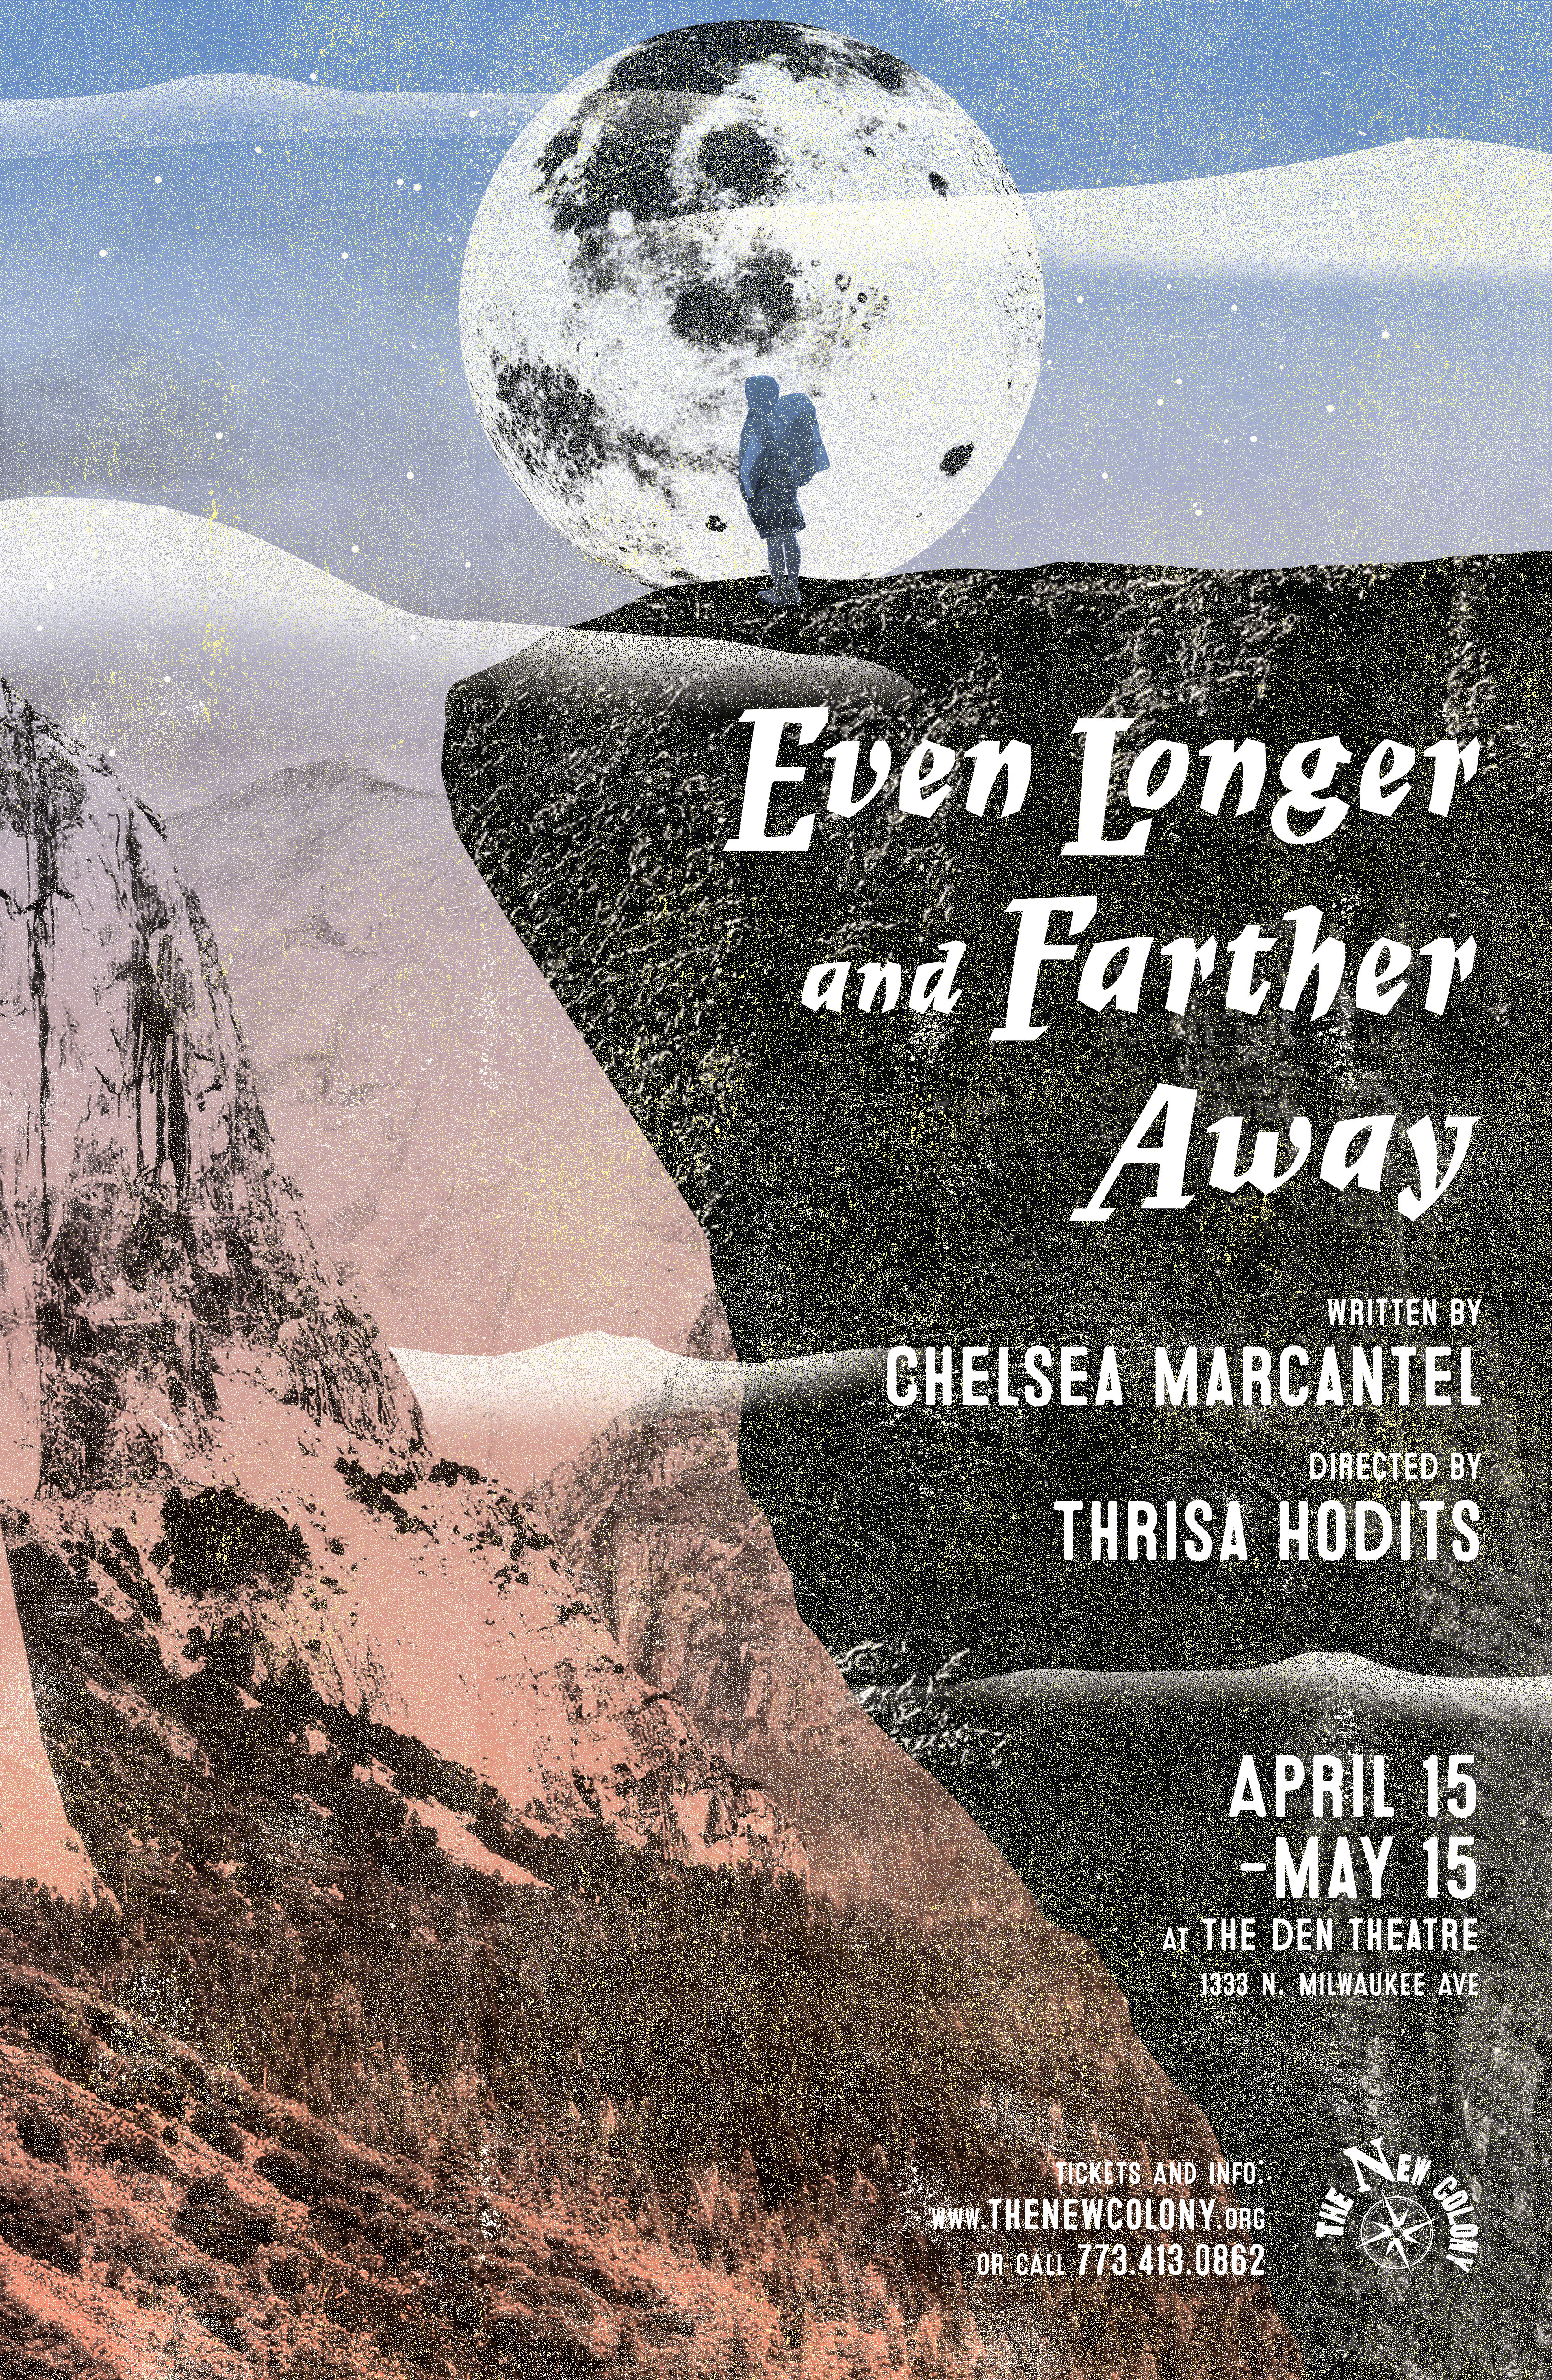 Chelsea Marcantel Charts a Family Journey on Appalachian Trail in World Premiere “Even Longer and Farther Away” | By Kenneth Jones